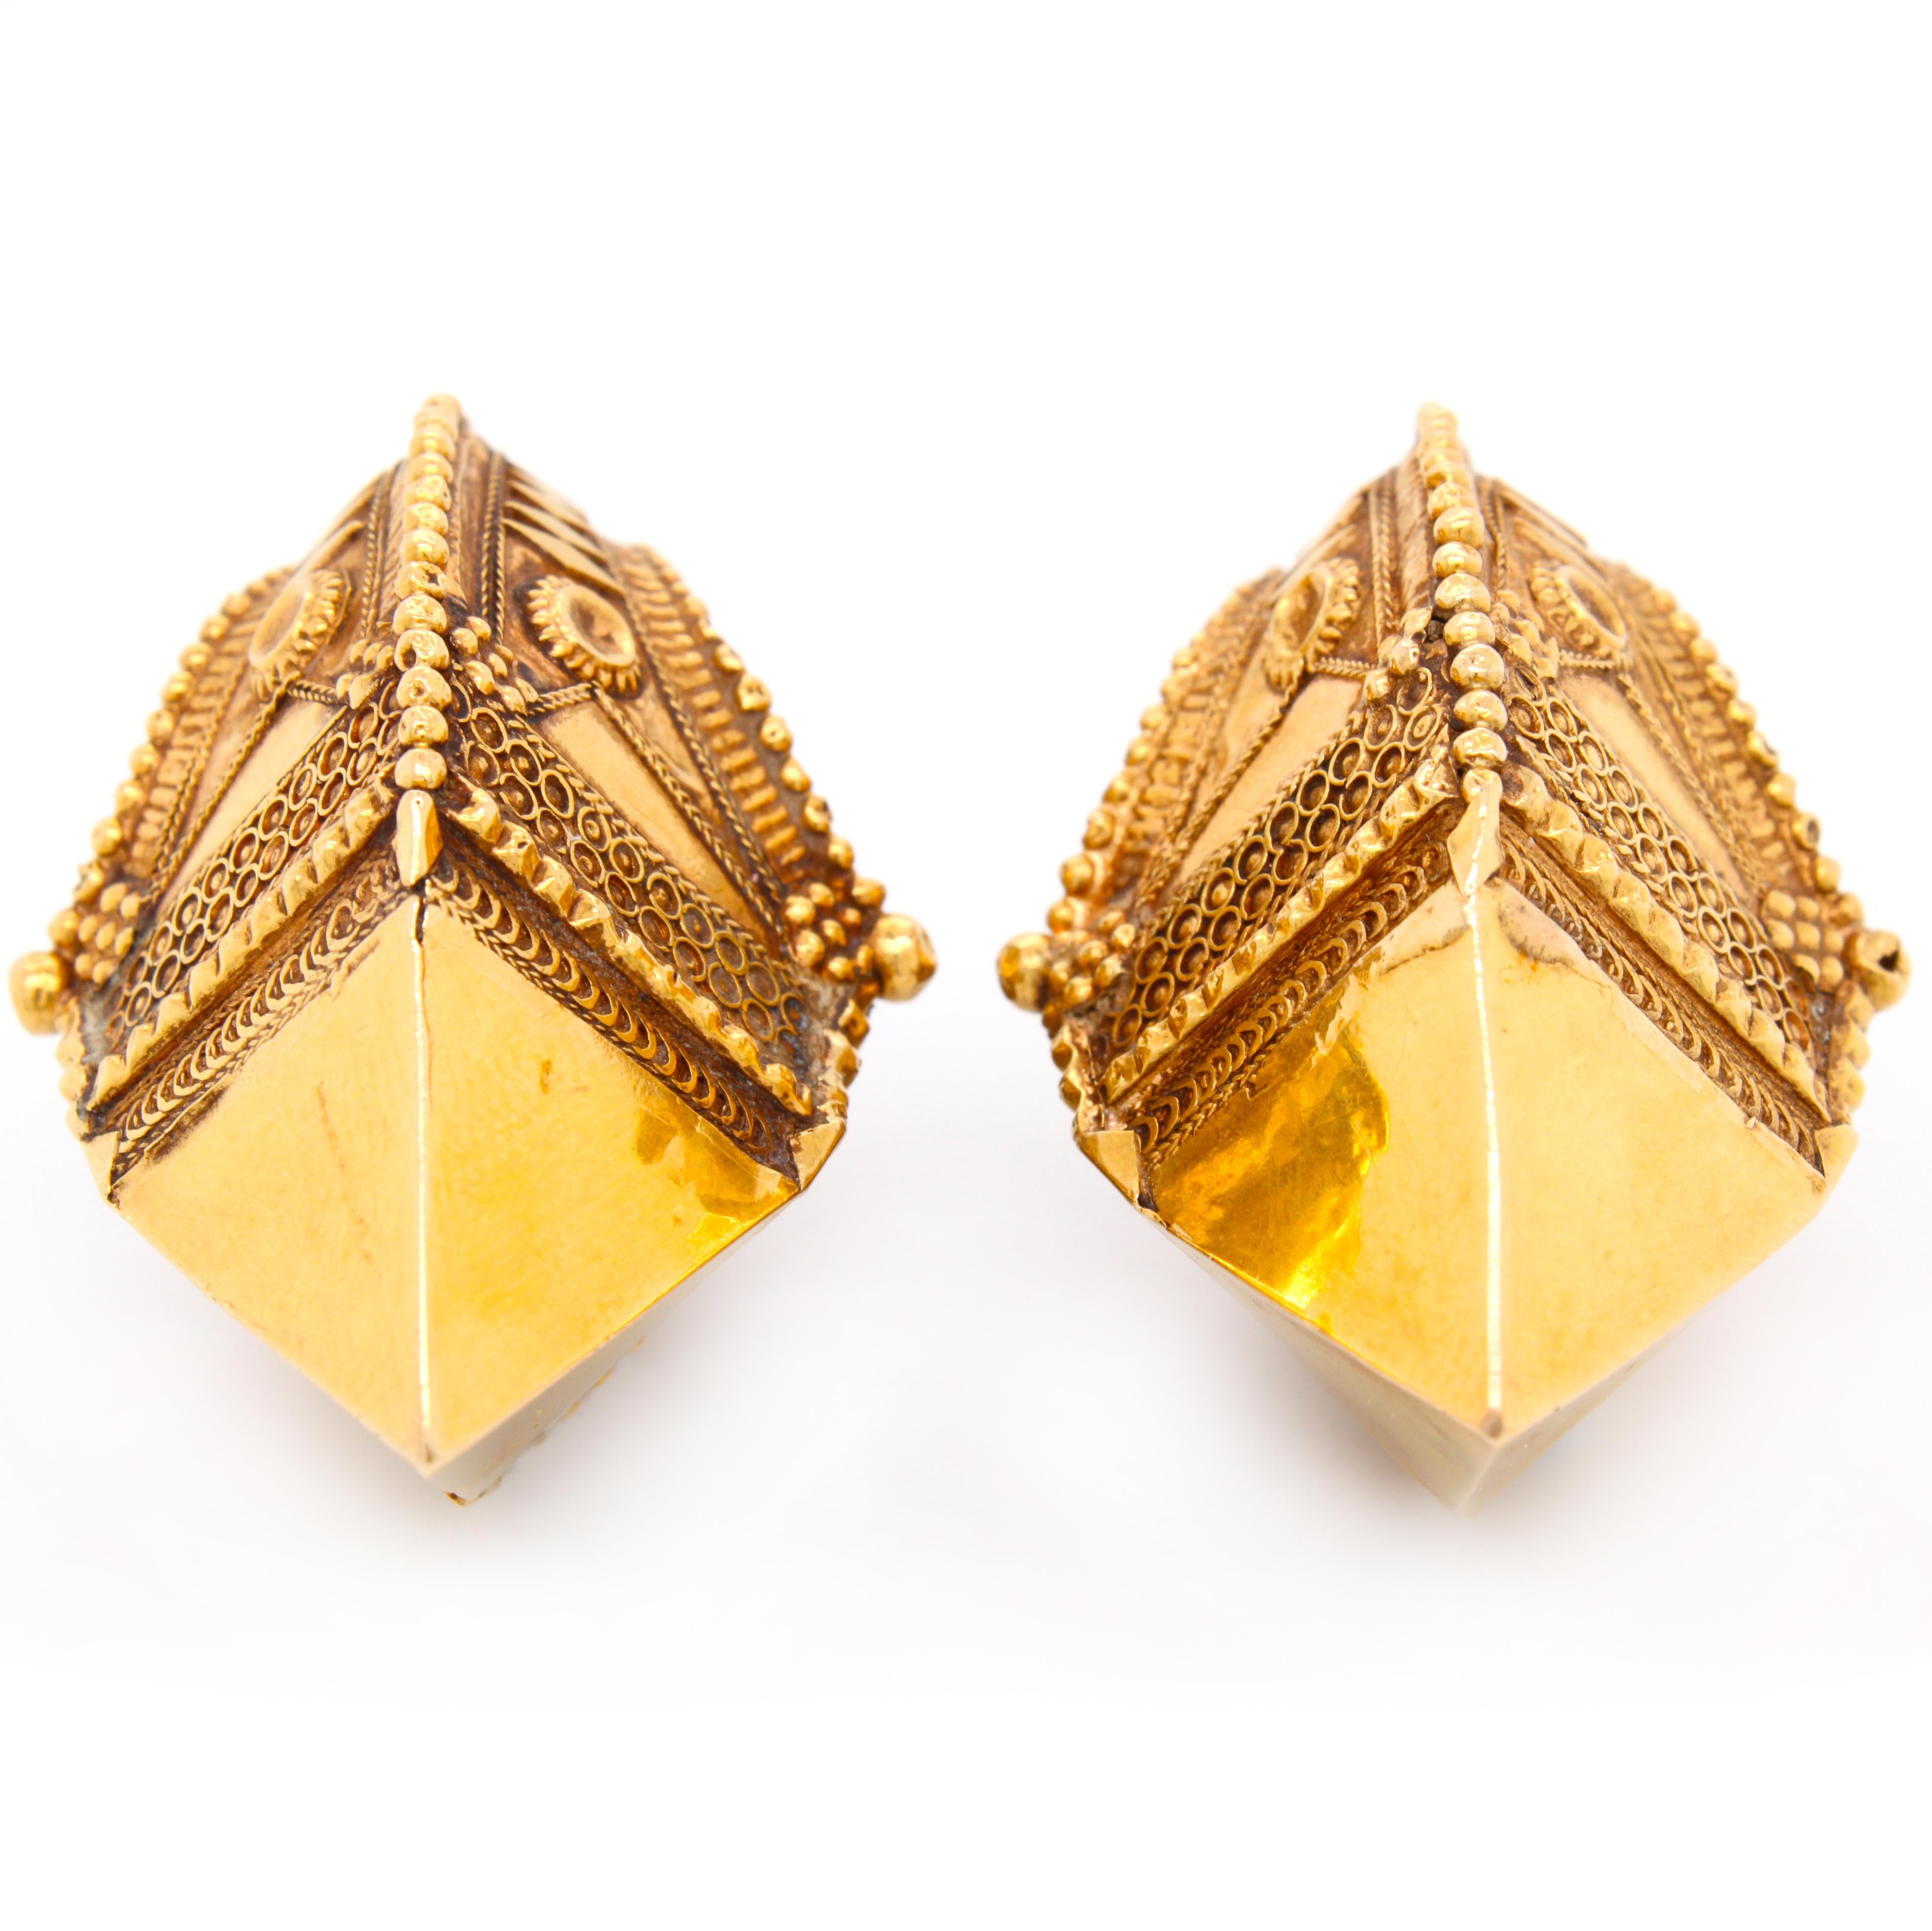 These big Etruscan Revival earrings are in 14k yellow gold and very finely worked. The geometric and floral design as well as reverse pyramidical shape at the bottom showcase the Etruscan Revival style. This came to prominence in Italy in the middle